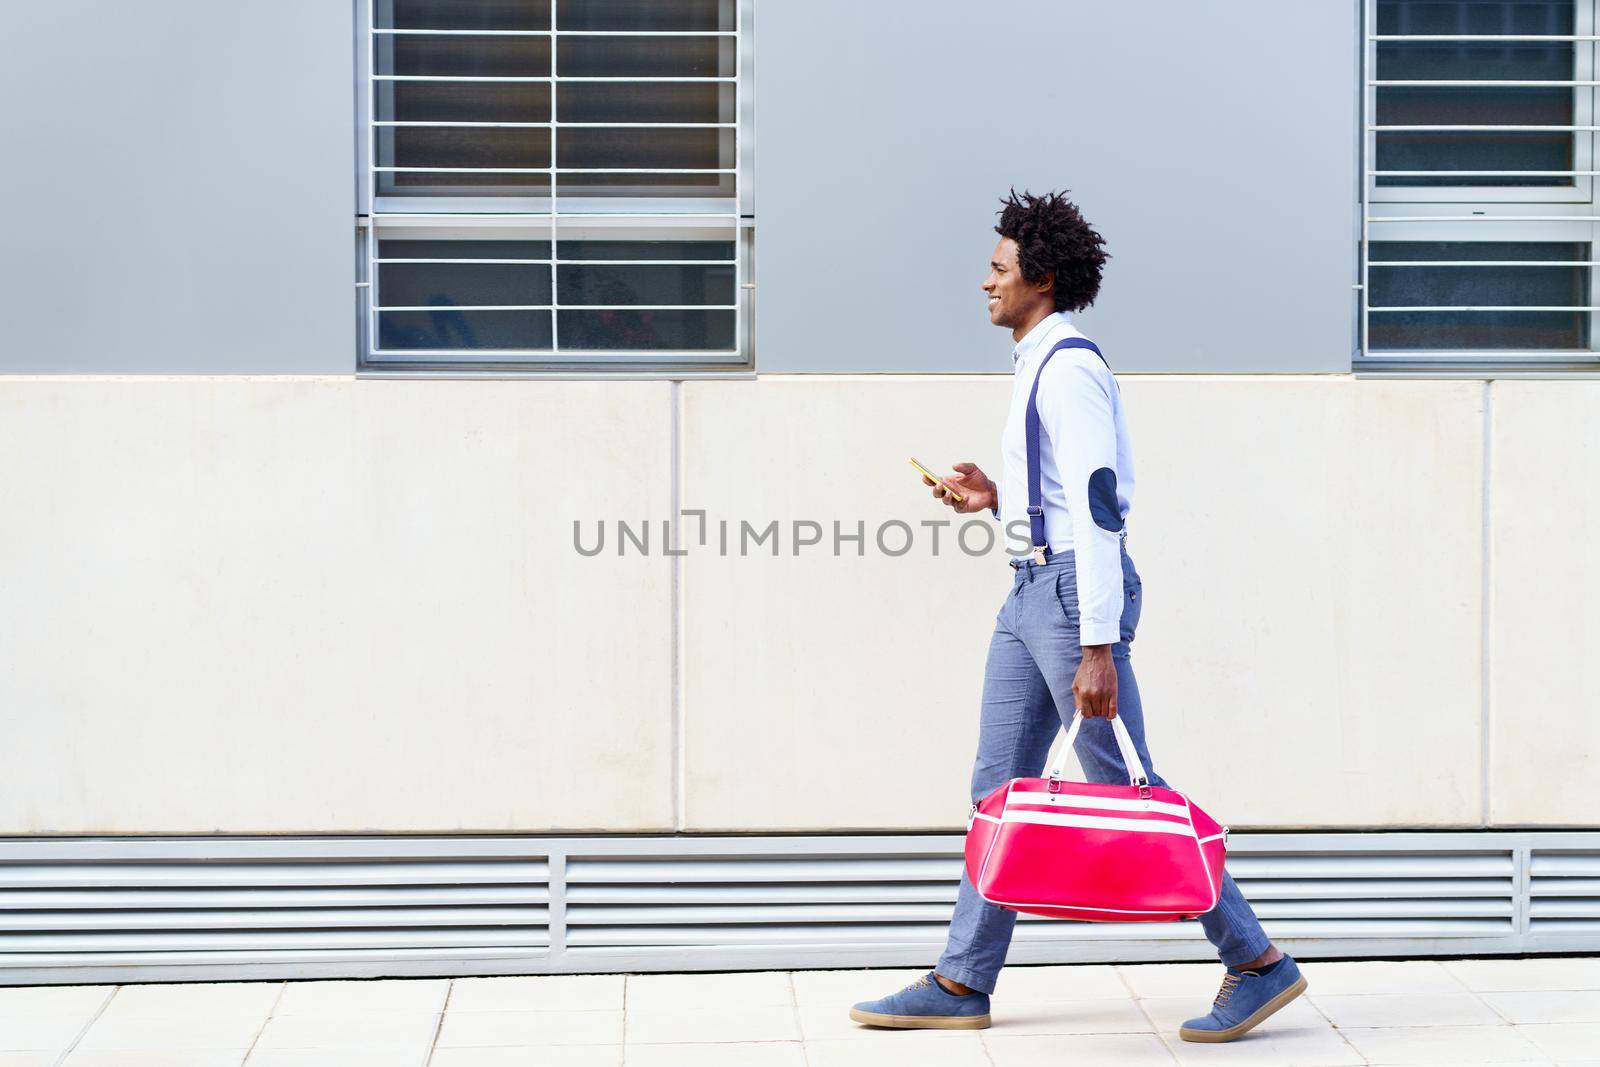 Black man with afro hairstyle carrying a sports bag and smartphone outdoors. by javiindy